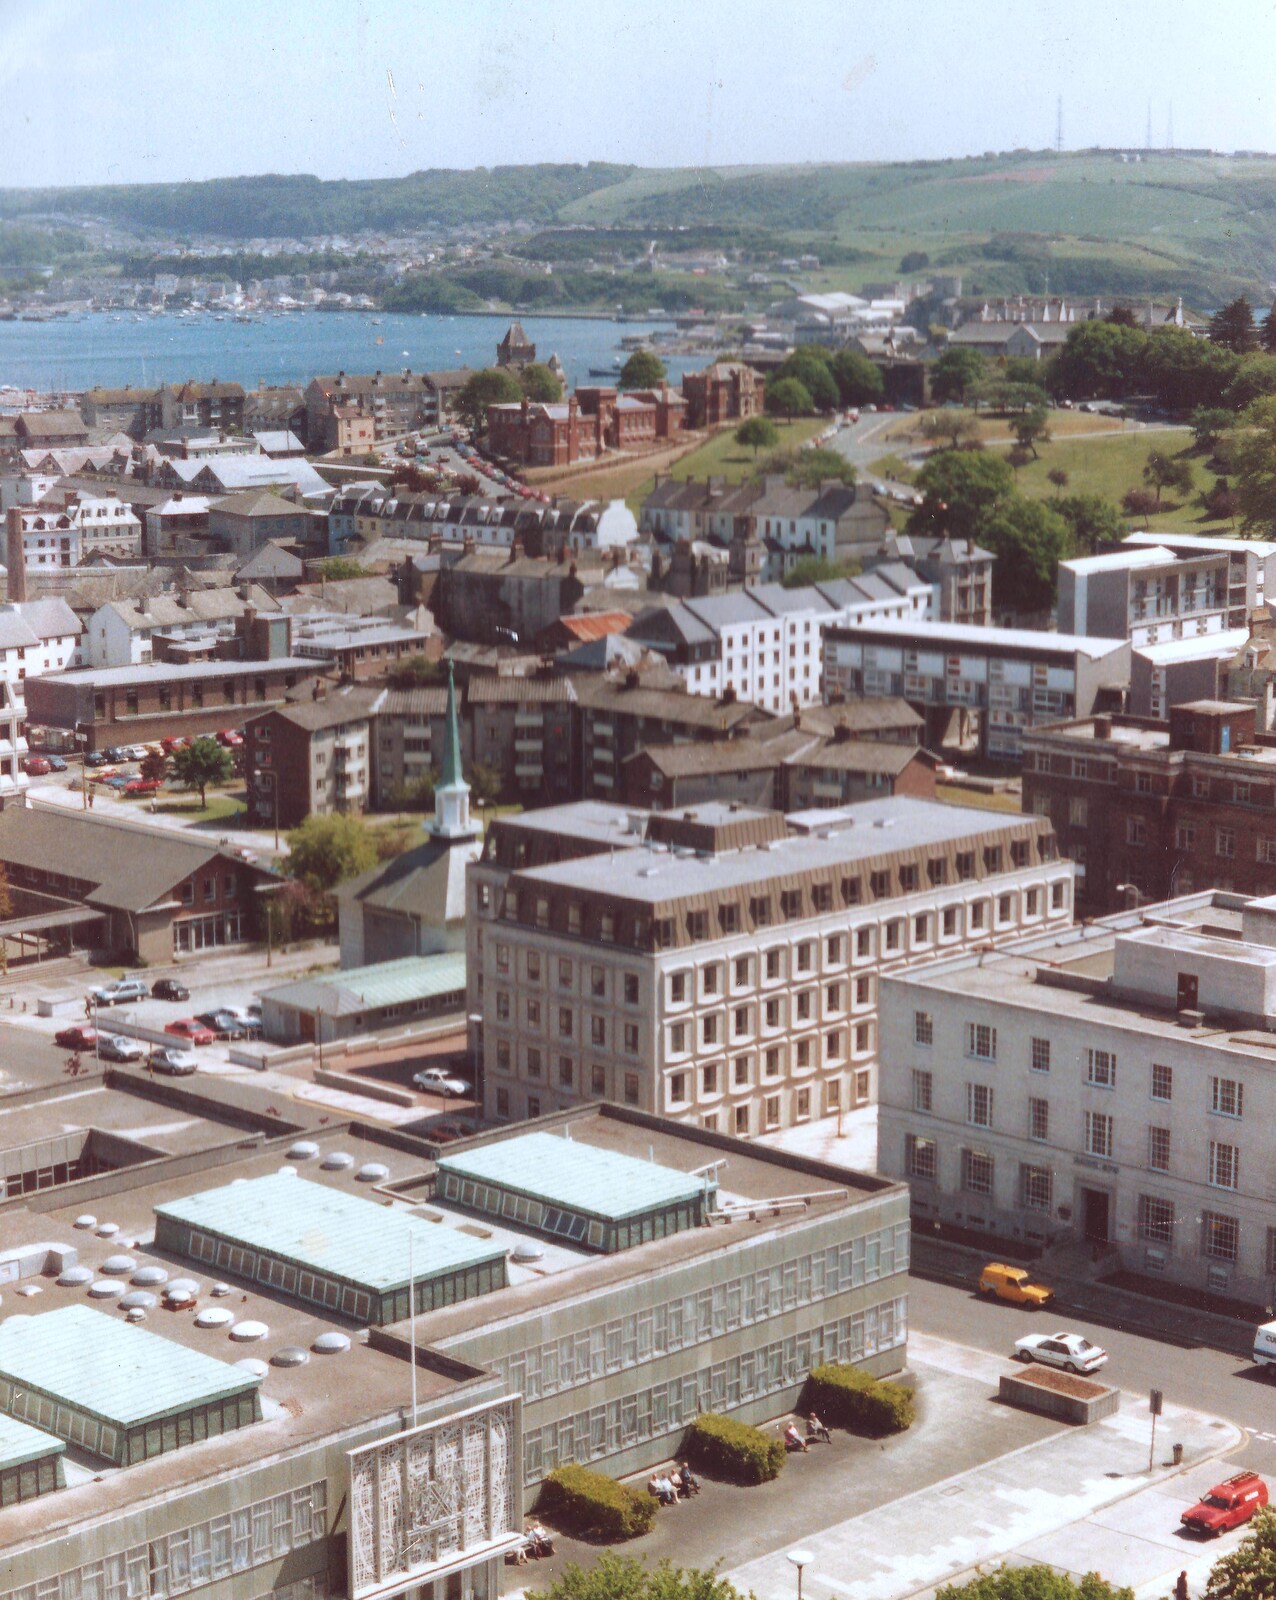 The view towards East Hoe and Mount Batten from Aerial Scenes of Plymouth, Devon - 28th June 1987